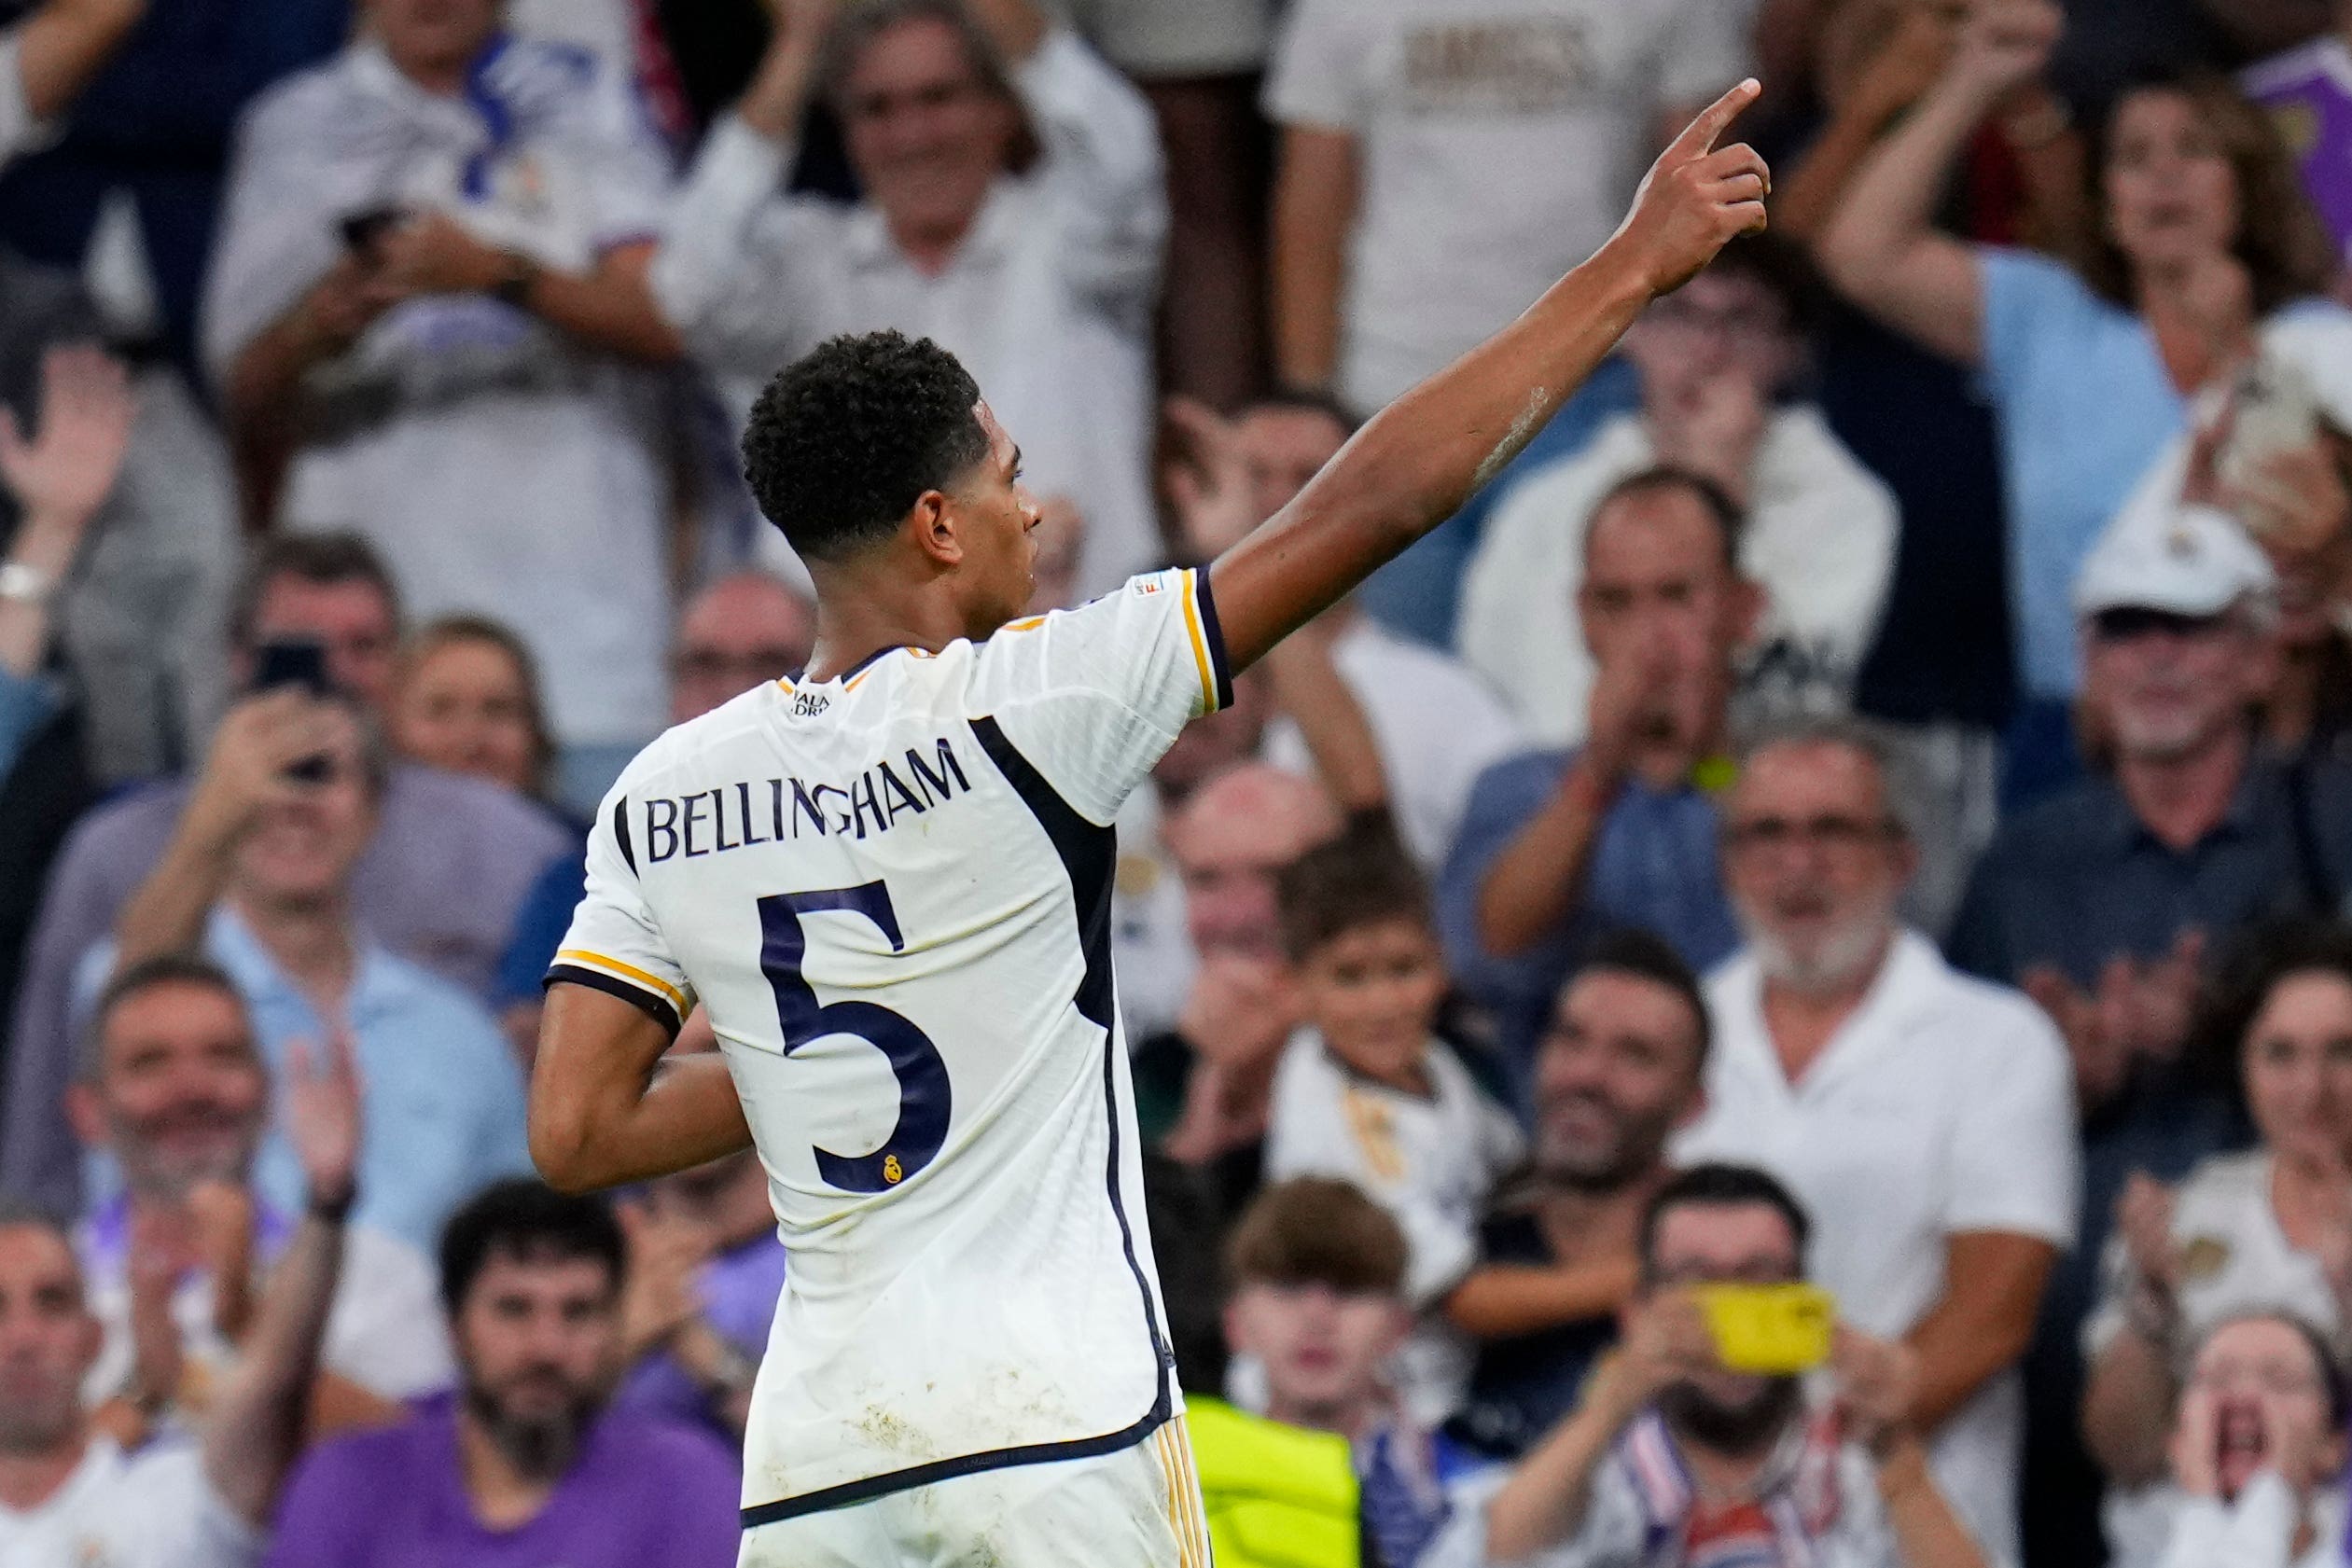 Jude Bellingham rescues Real Madrid again in last-minute Champions League  win